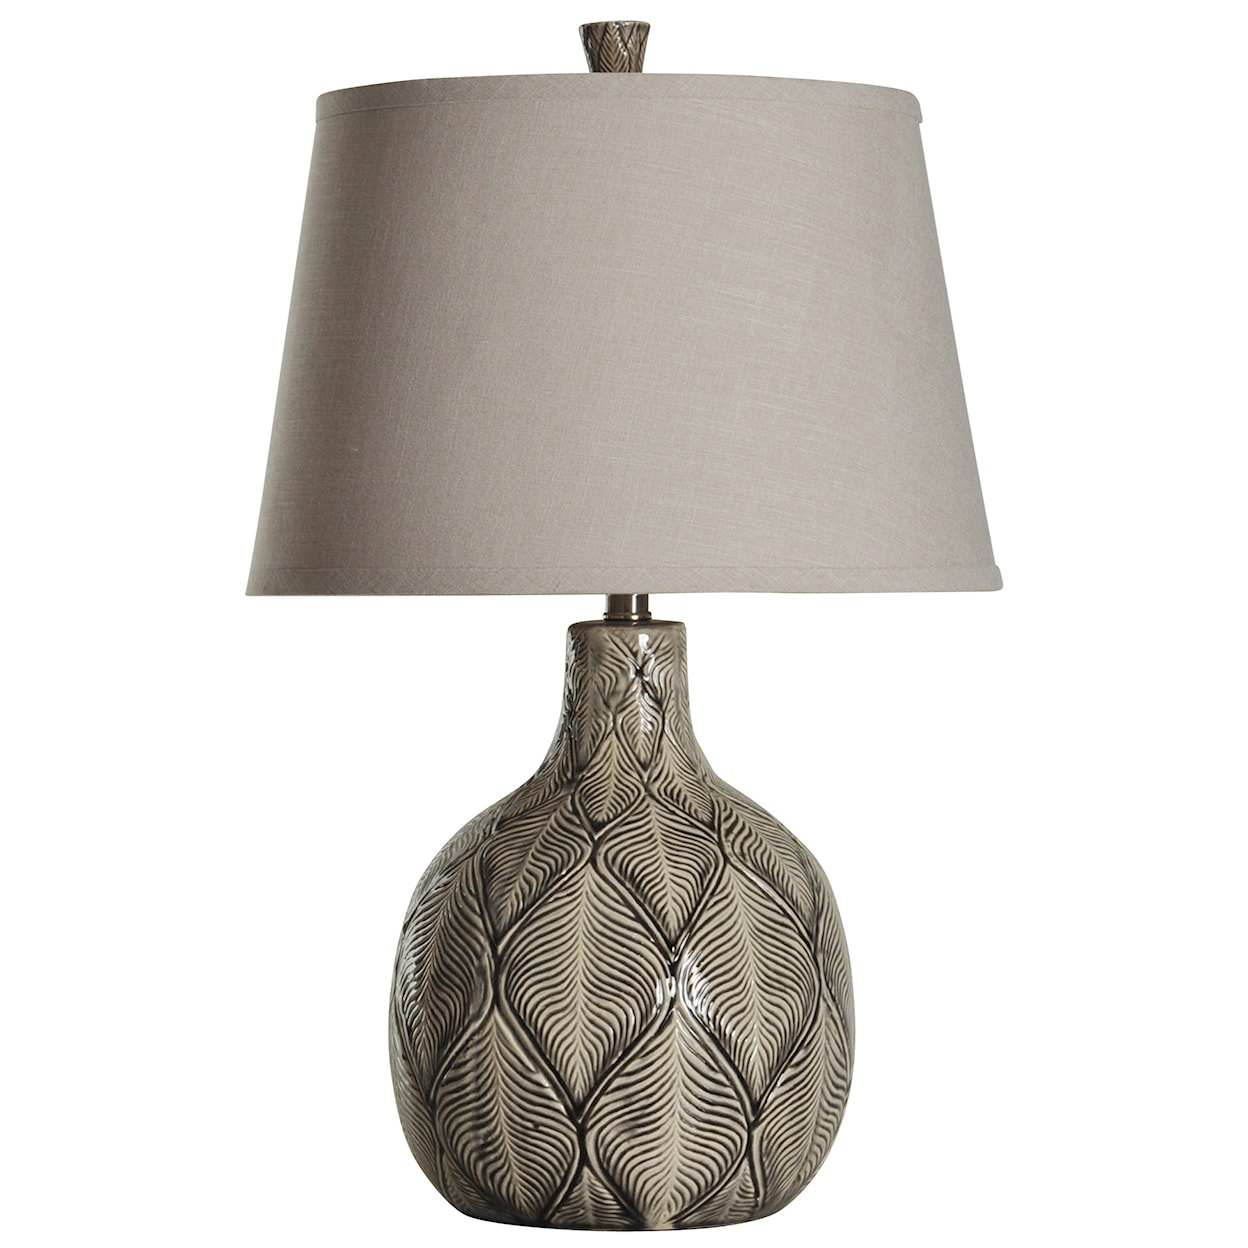 StyleCraft Lamps Transitional Ceramic Table Lamp